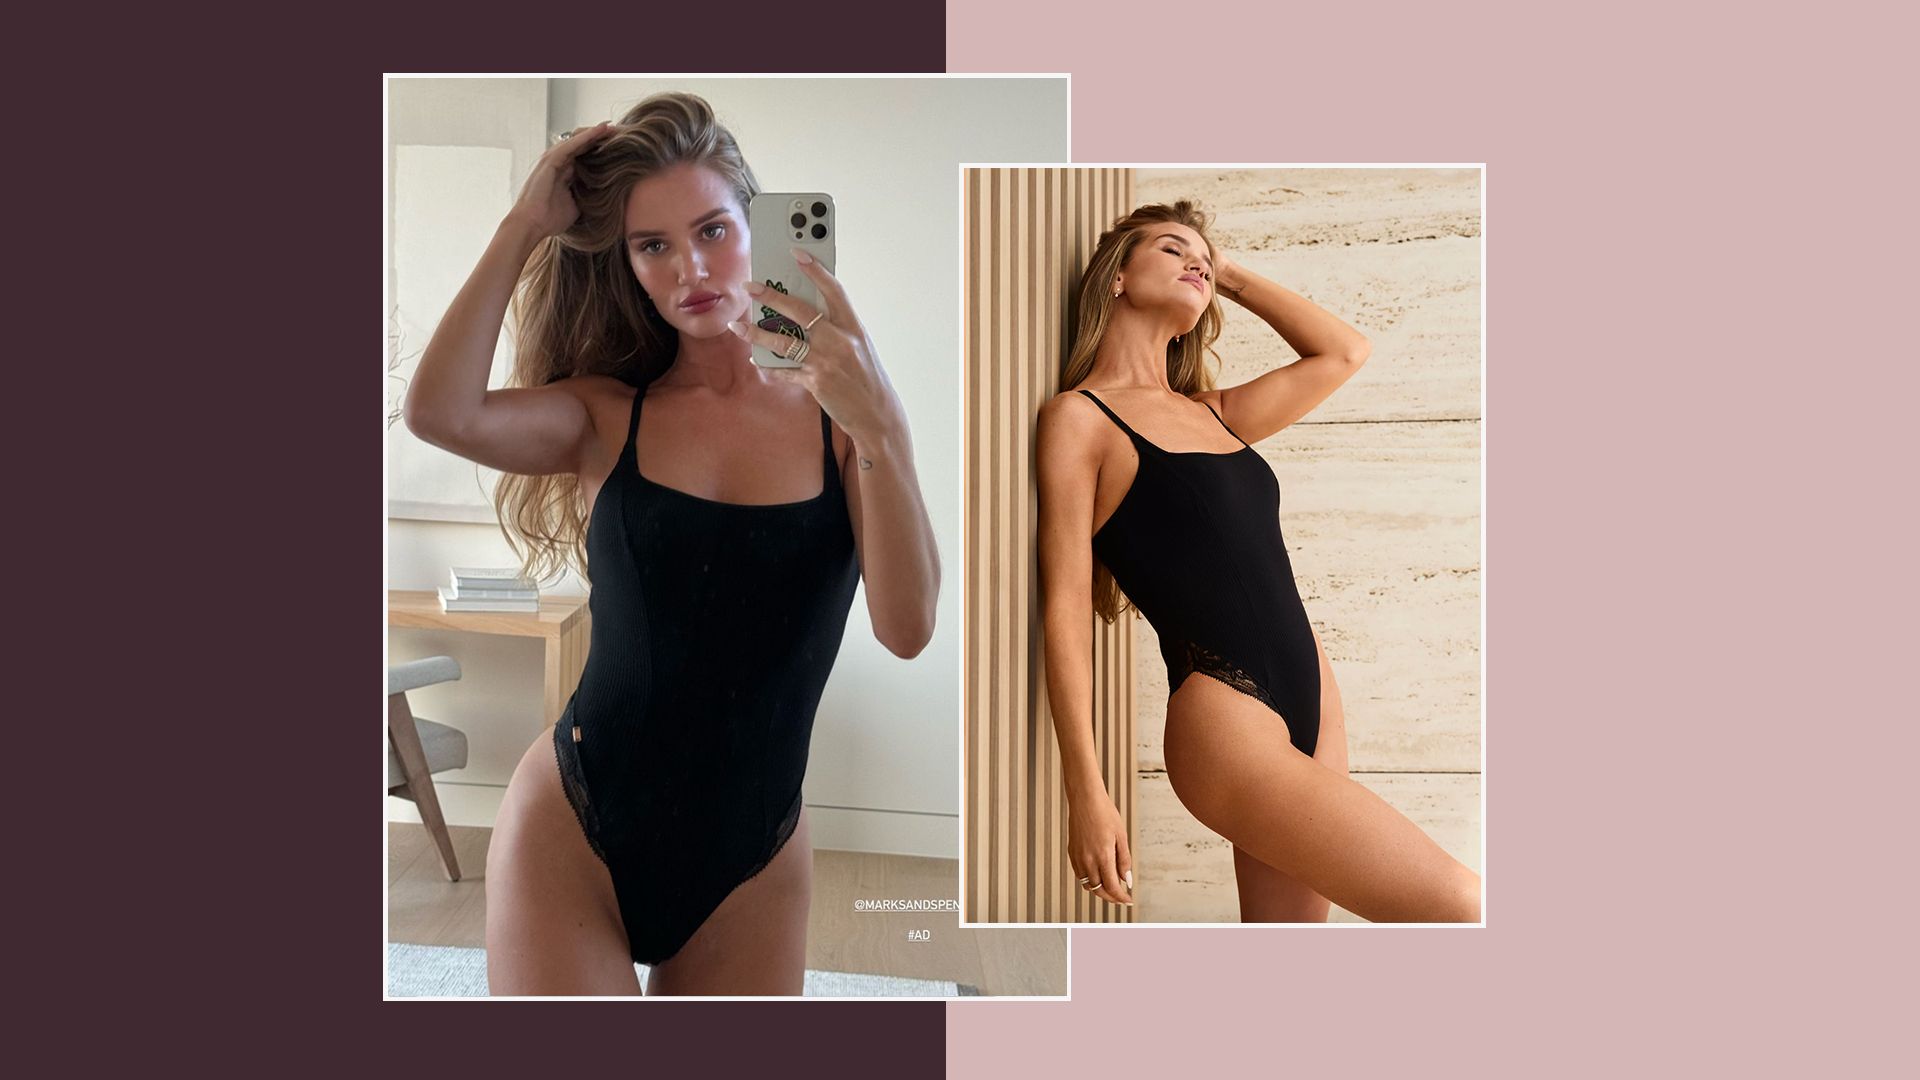 Rosie Huntington-Whiteley looks unreal in £26 M&S bodysuit - and now I have to have one